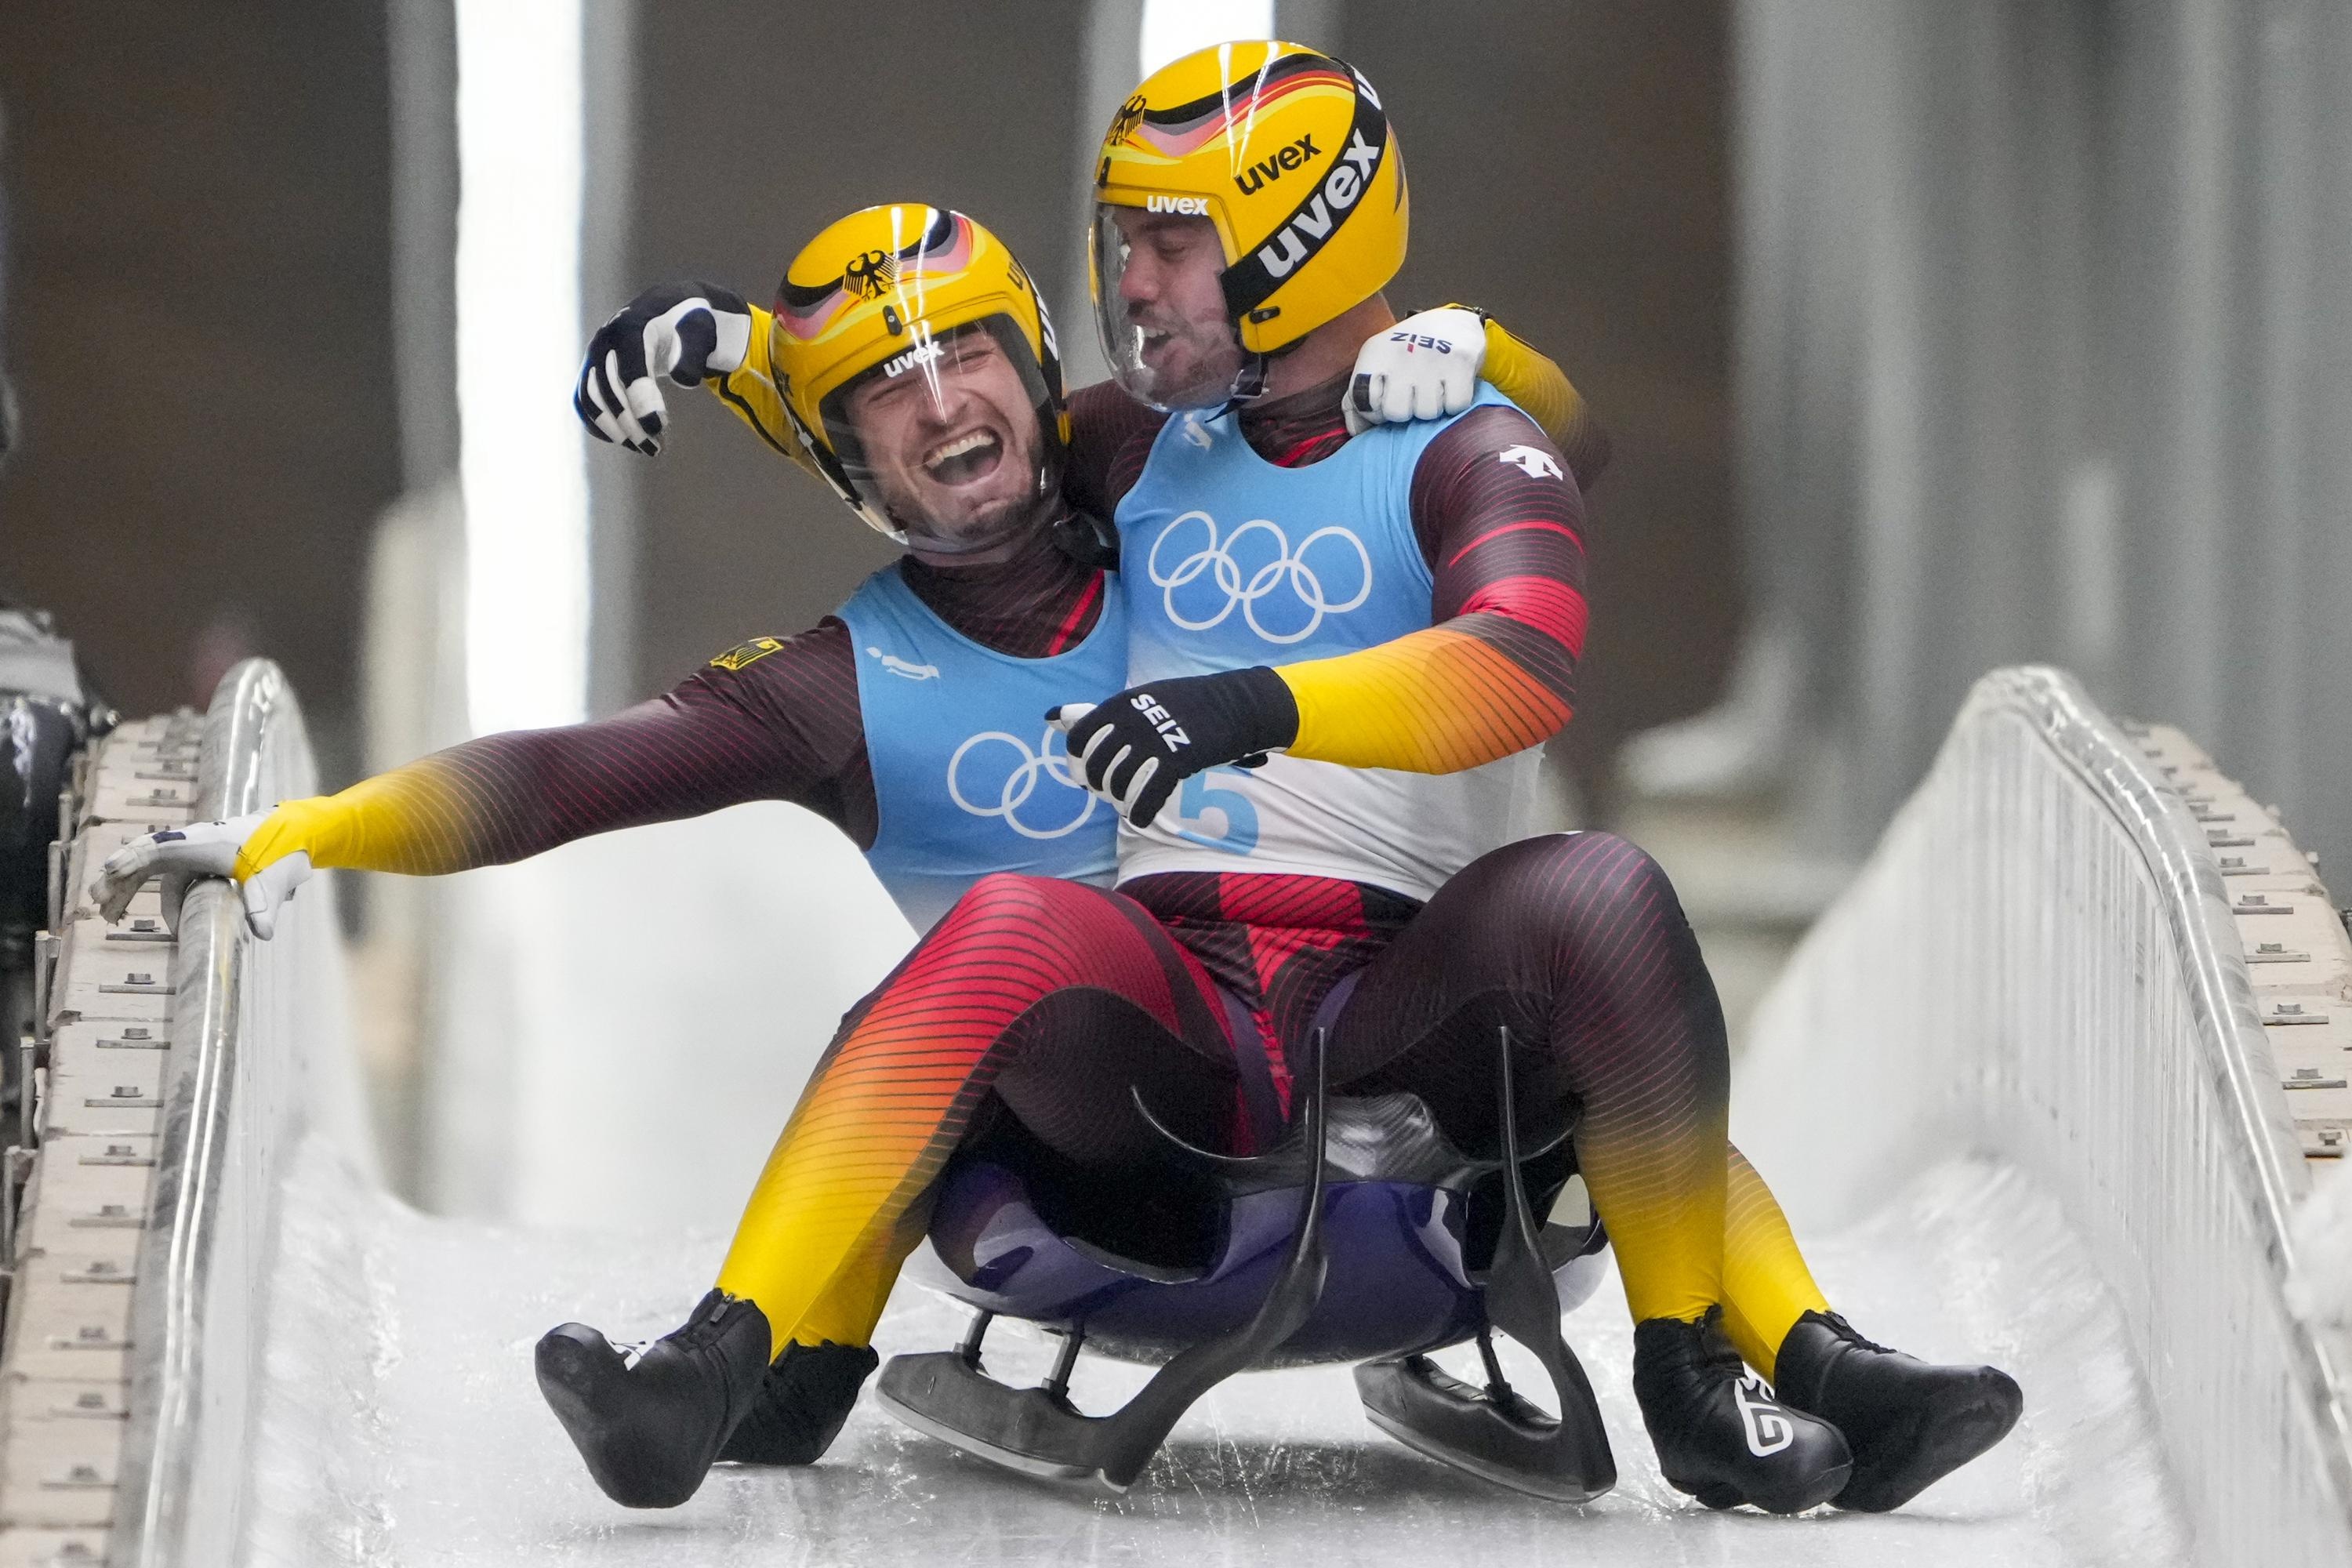 Luge: Tobias Wendl and Tobias Arlt, The doubles event at the 2022 Beijing Winter Olympics. 3000x2000 HD Background.